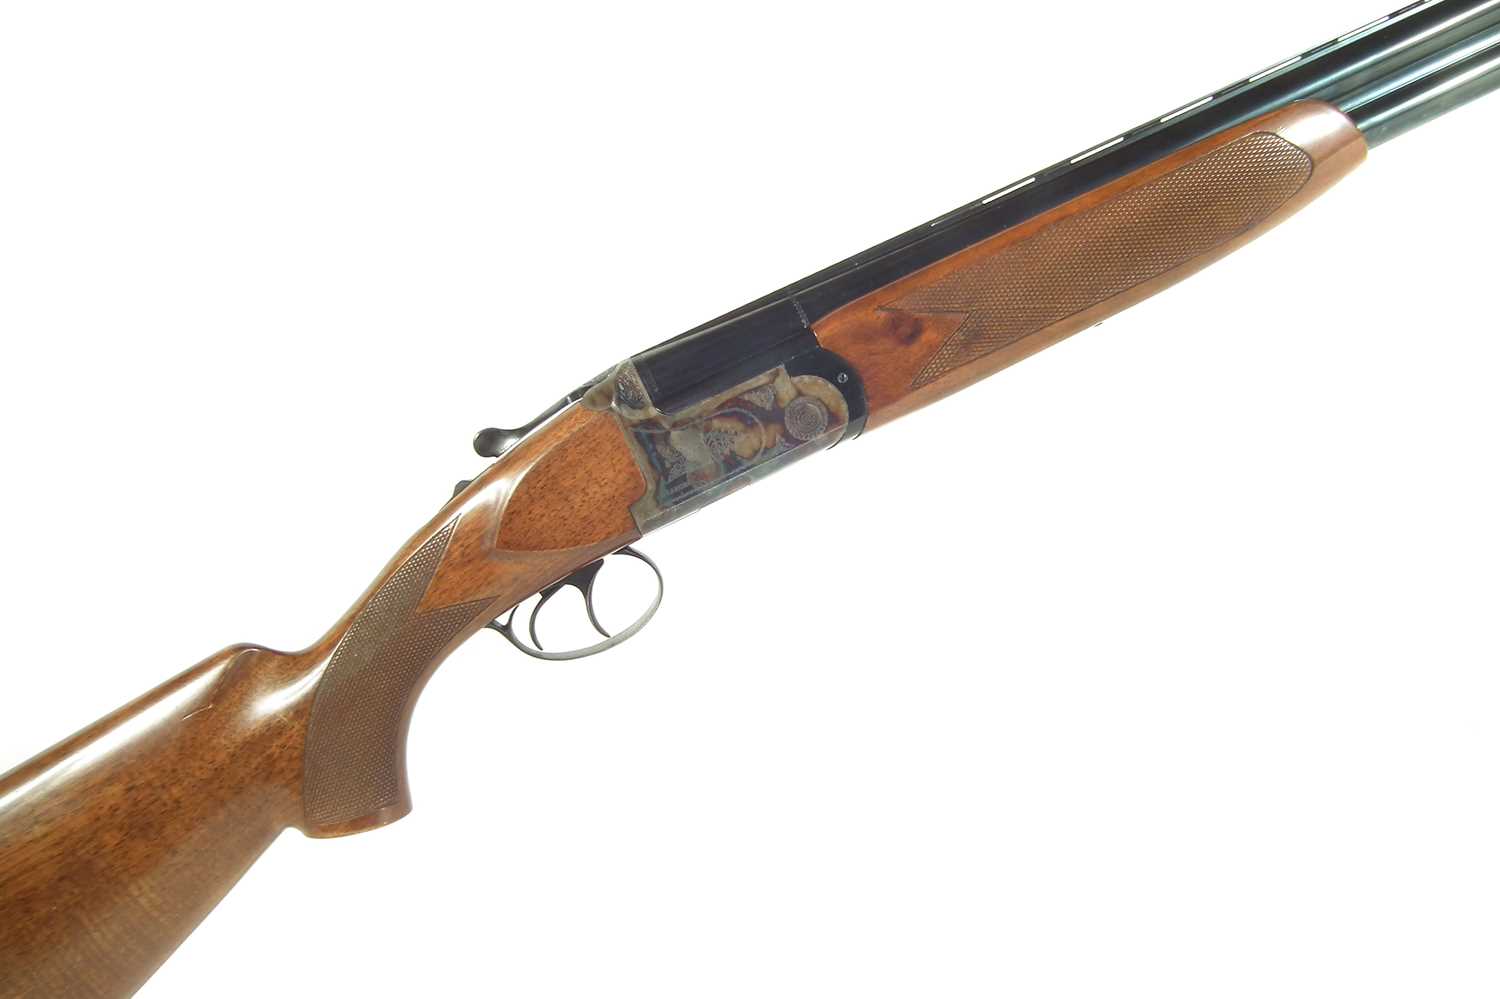 Lot 205 - Franchi 12 bore over and under shotgun LICENCE REQUIRED